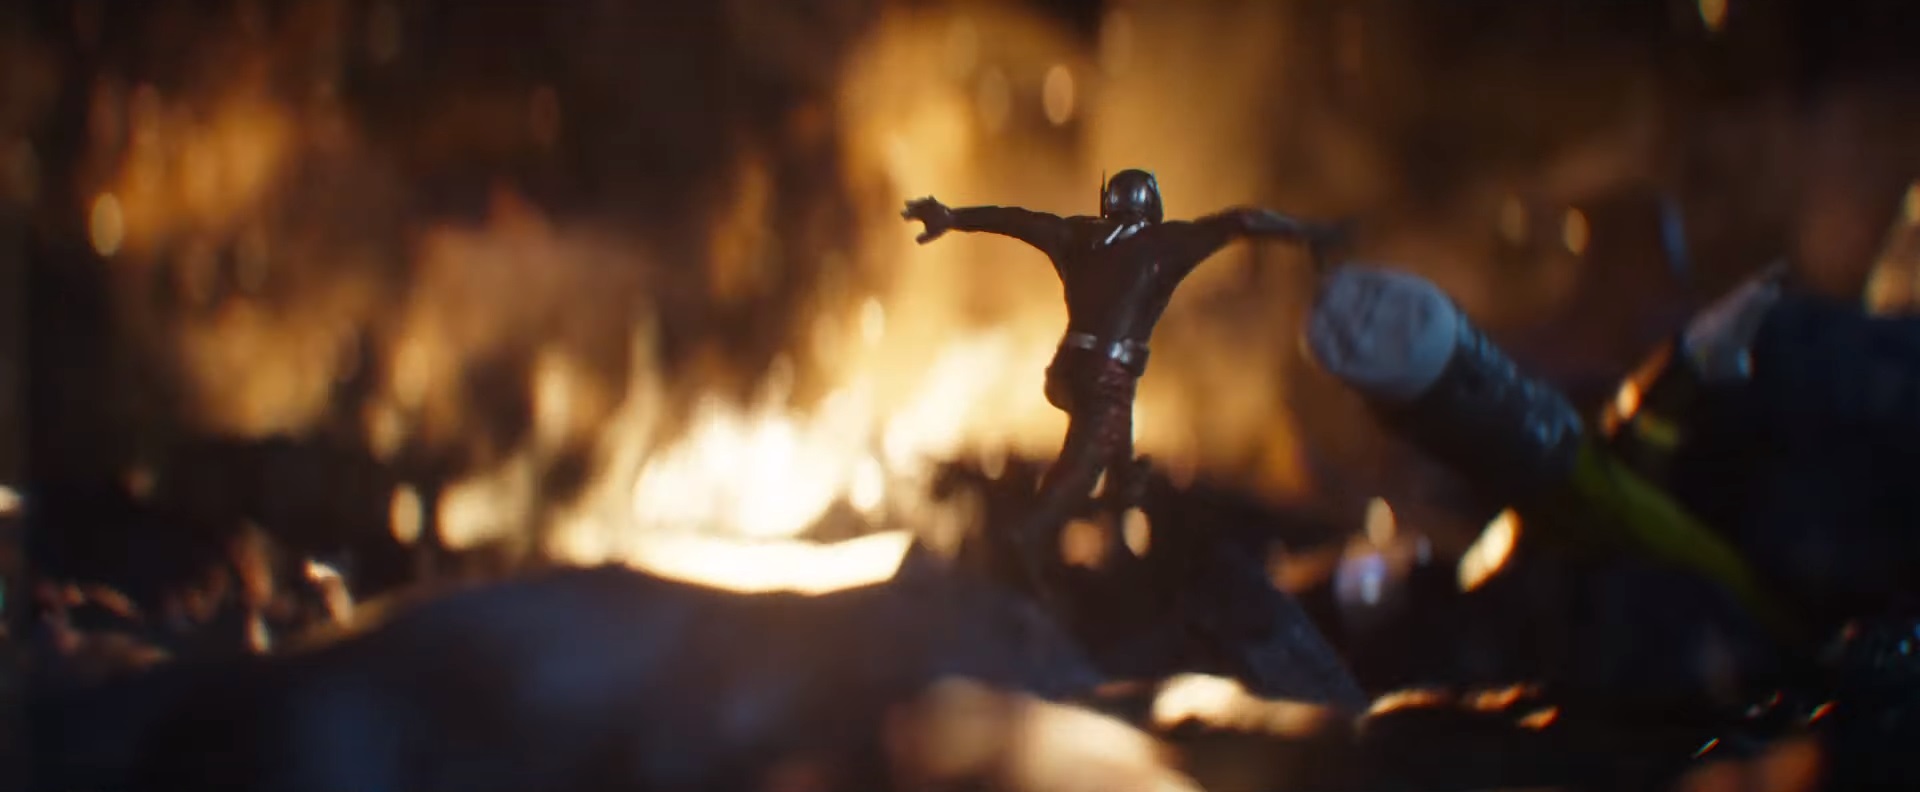 Avengers: Endgame Takes Could Top The Force Awakens In Thursday Previews